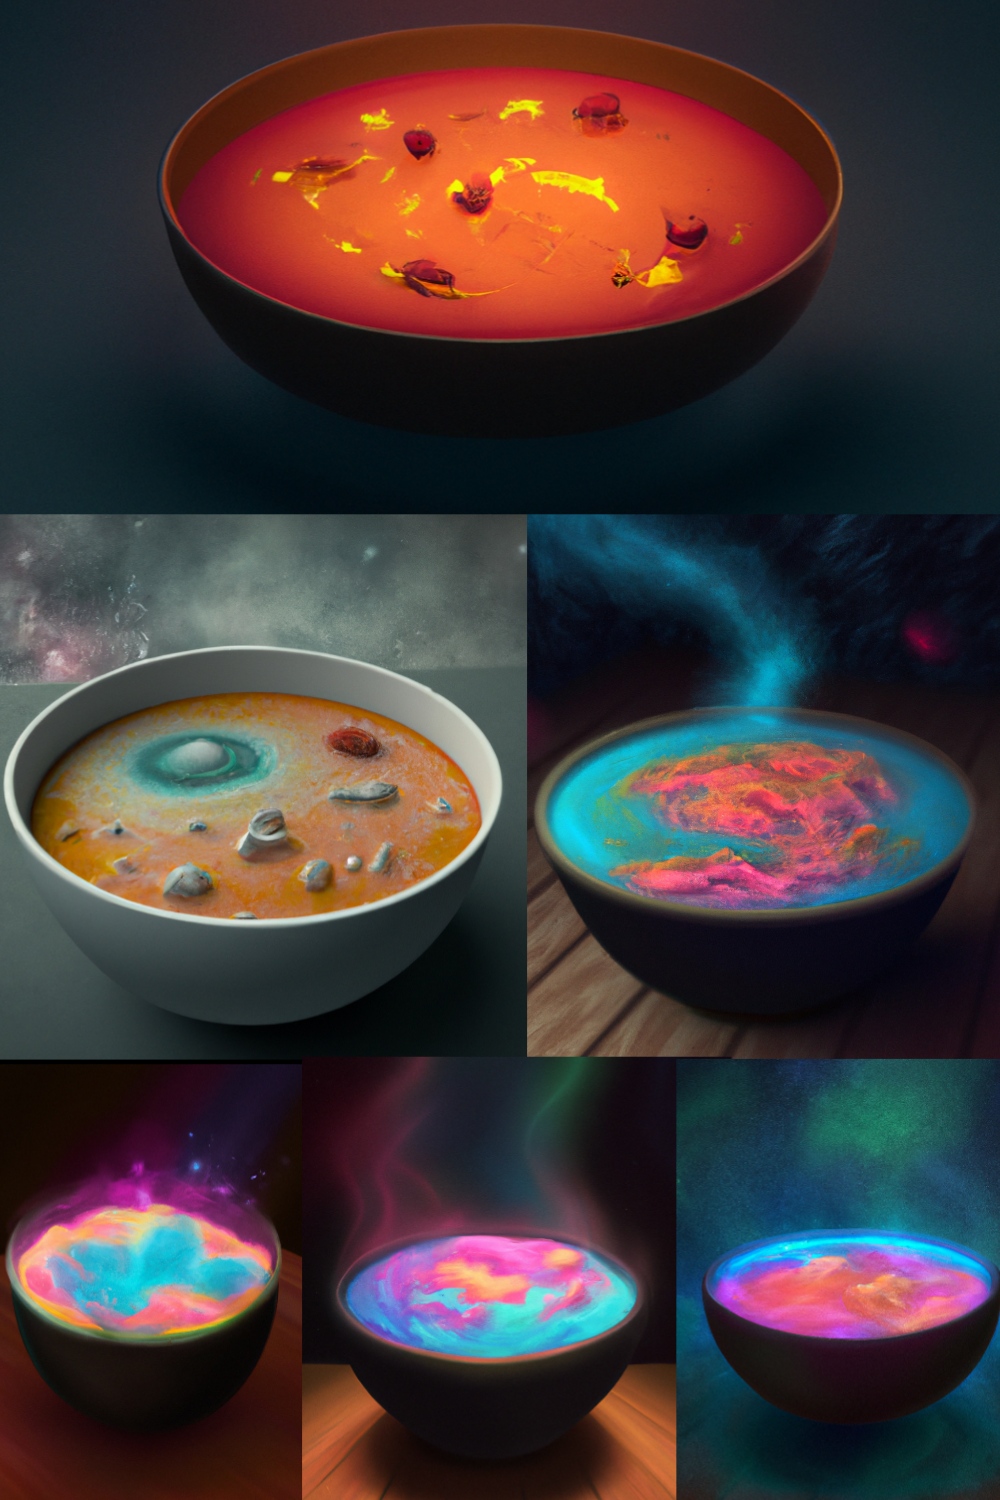 A bowl of soup that is also a portal to another dimension, digital art bundle pinterest preview image.